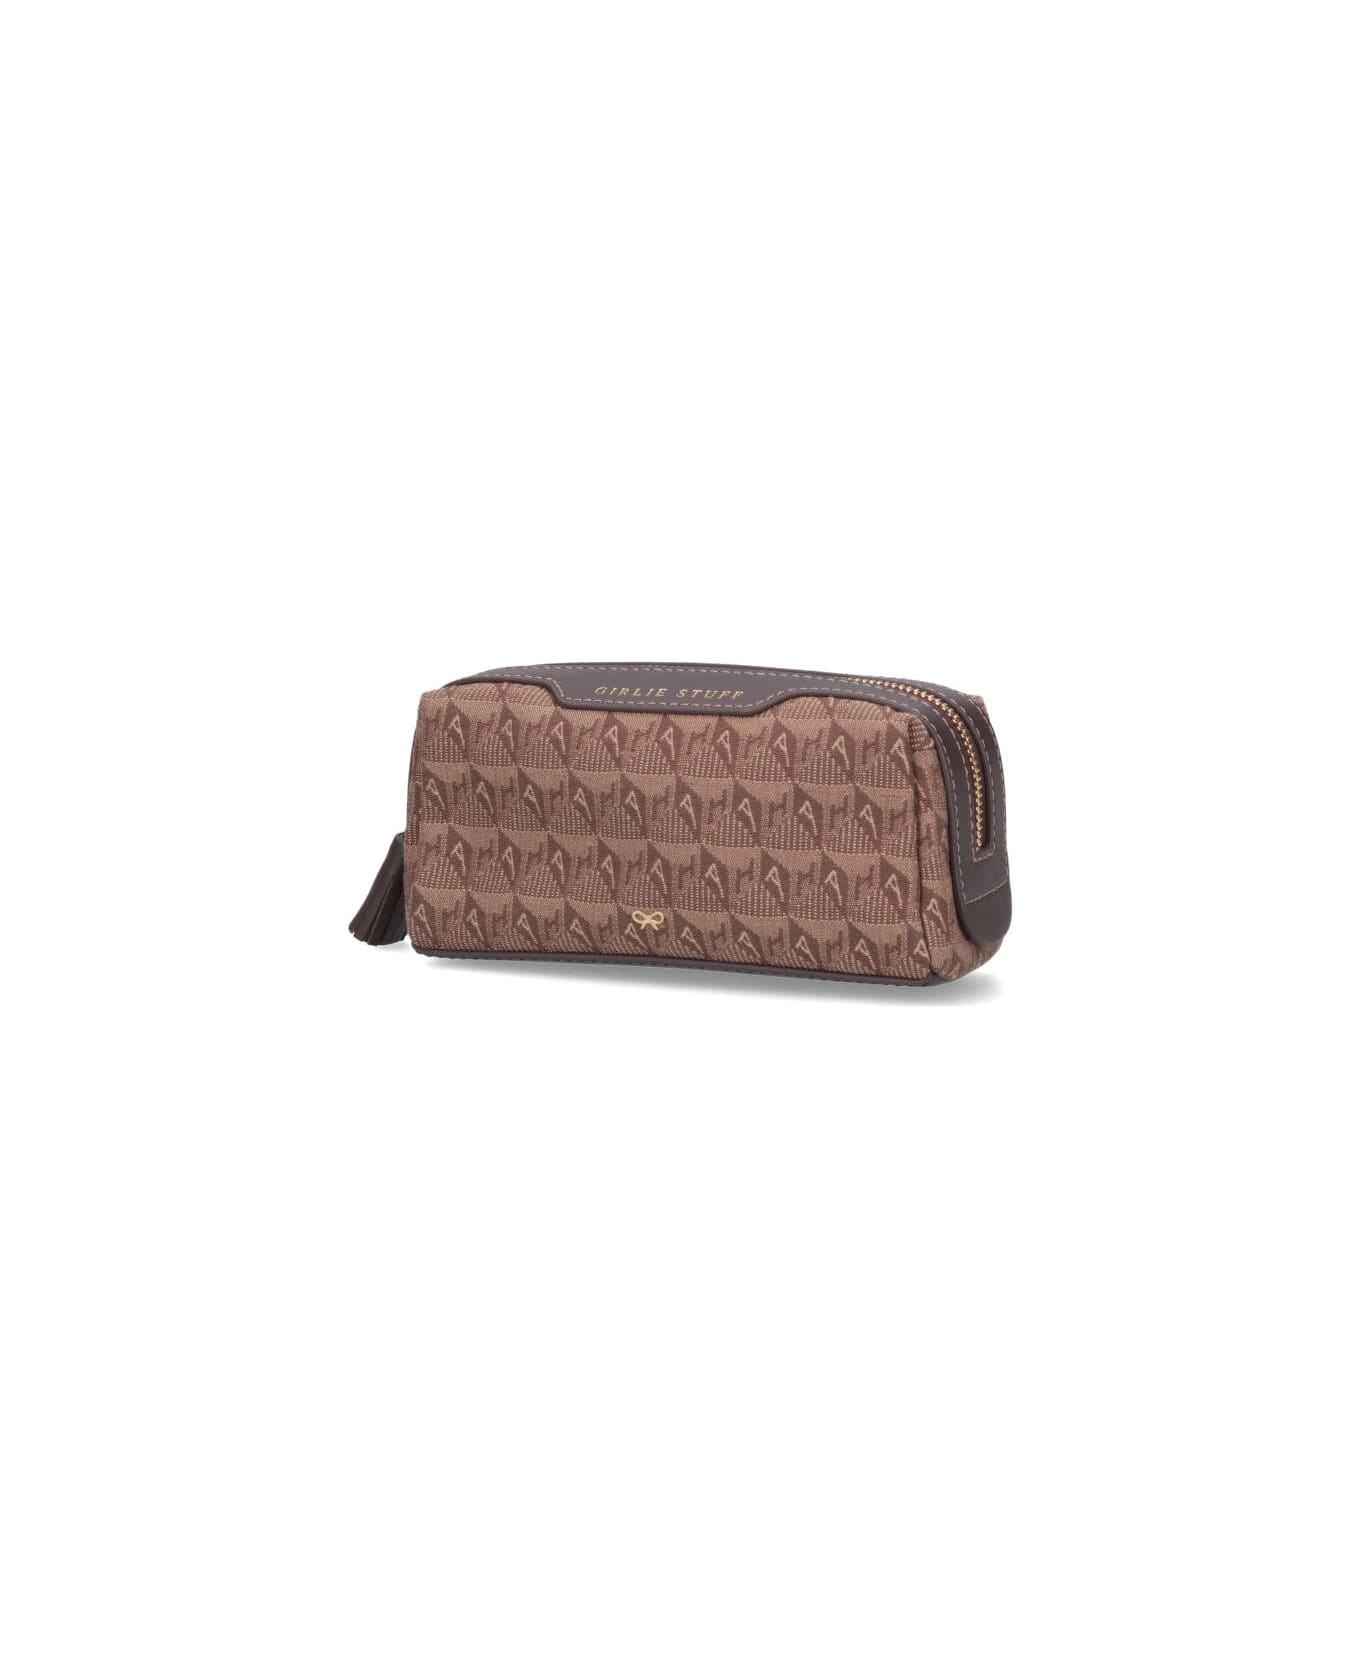 Anya Hindmarch Pouch "girlie Stuff" - Brown